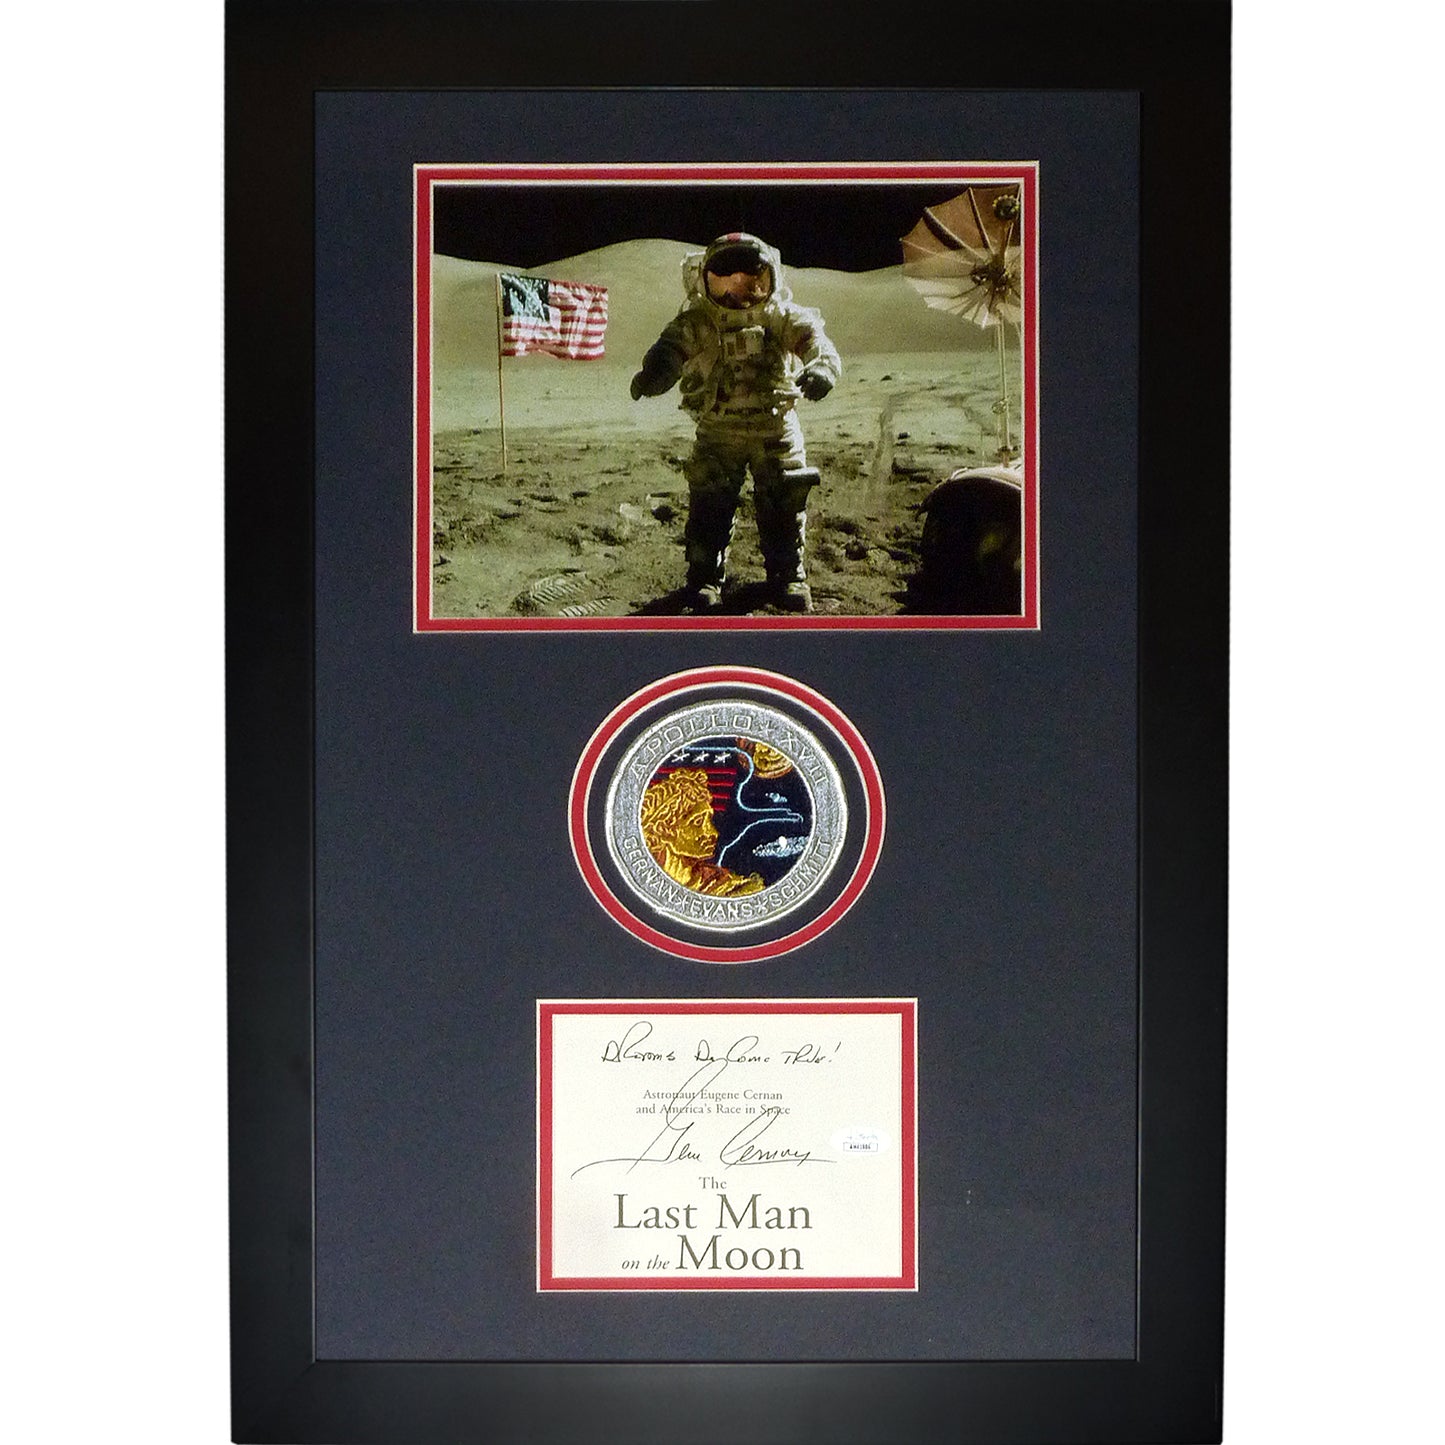 Gene Cernan Autographed “Last Man On The Moon” Deluxe Framed Astronaut Piece with Apollo XVII Patch – JSA